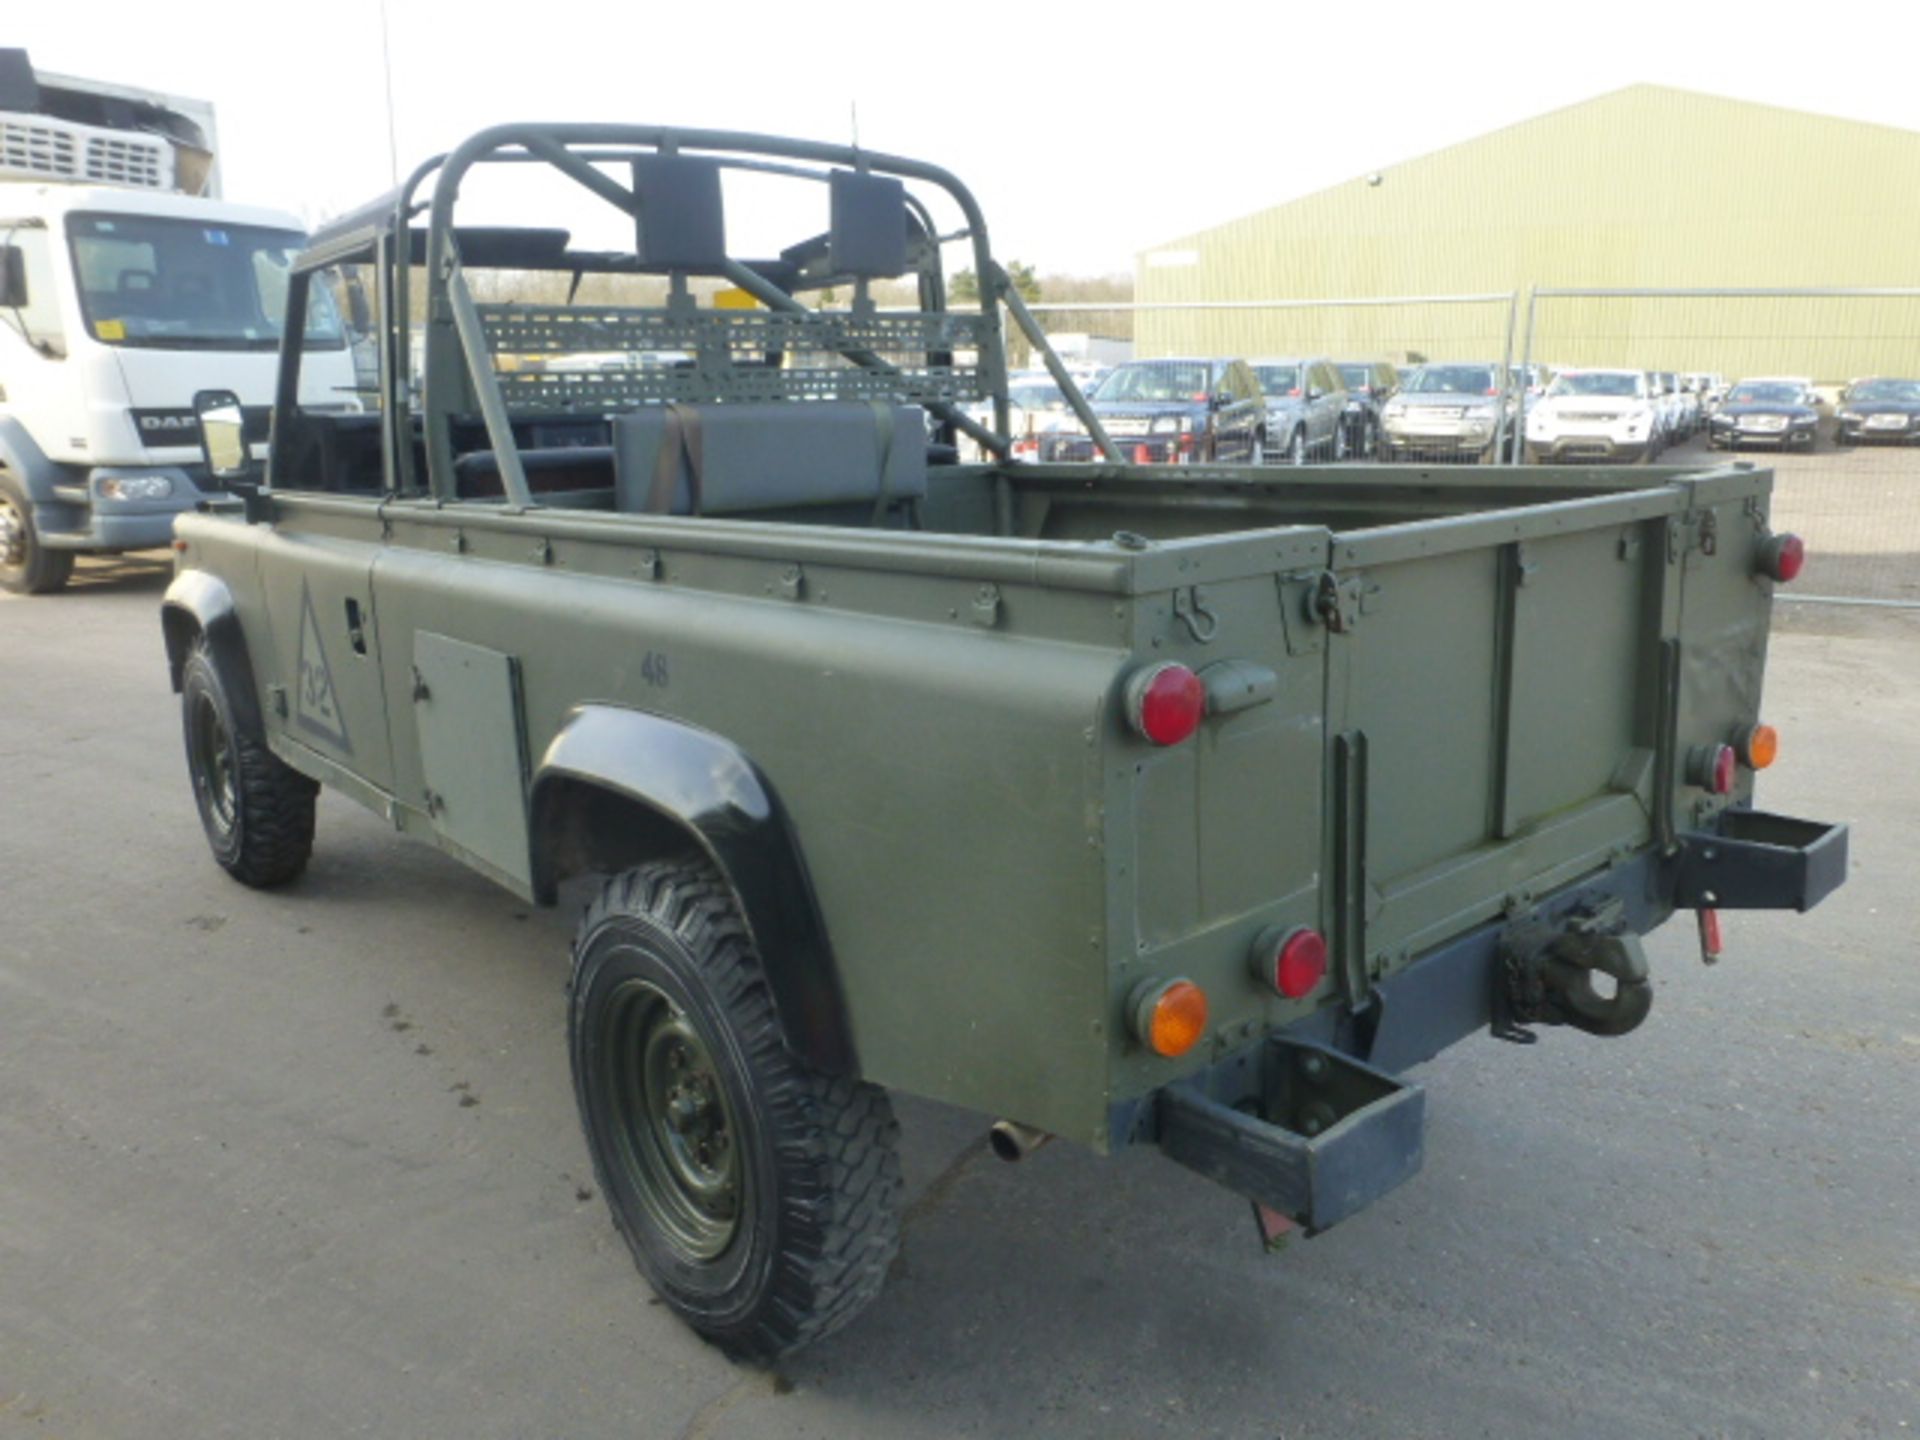 Reconnaissance Land Rover 110 Get Ready For Summer! - Image 6 of 15